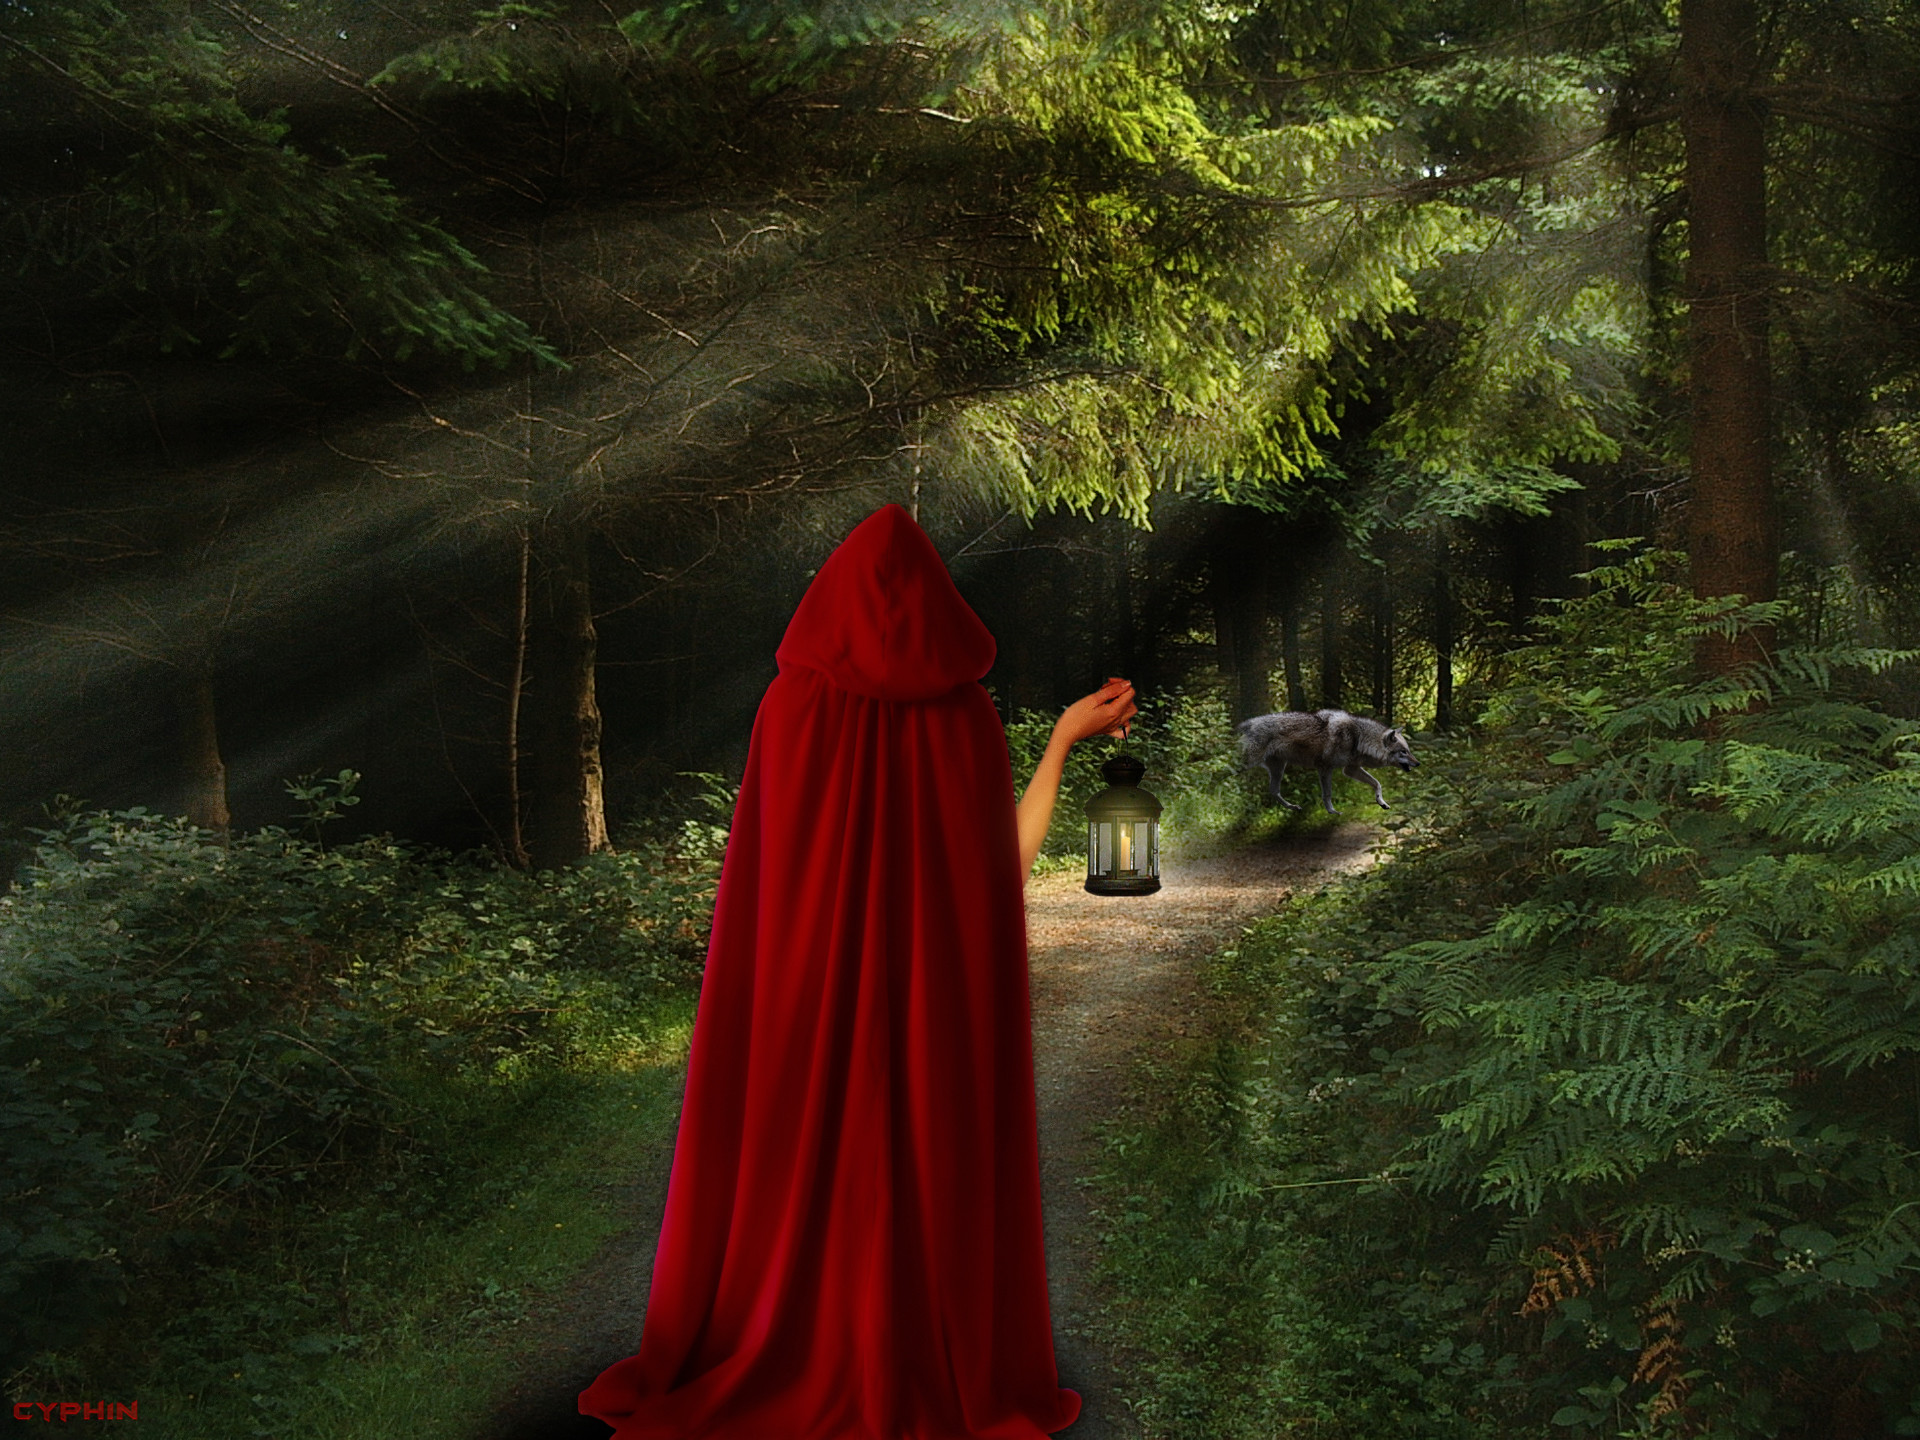 1920x1440 ... Red Riding Hood (Day) by Cyph1n